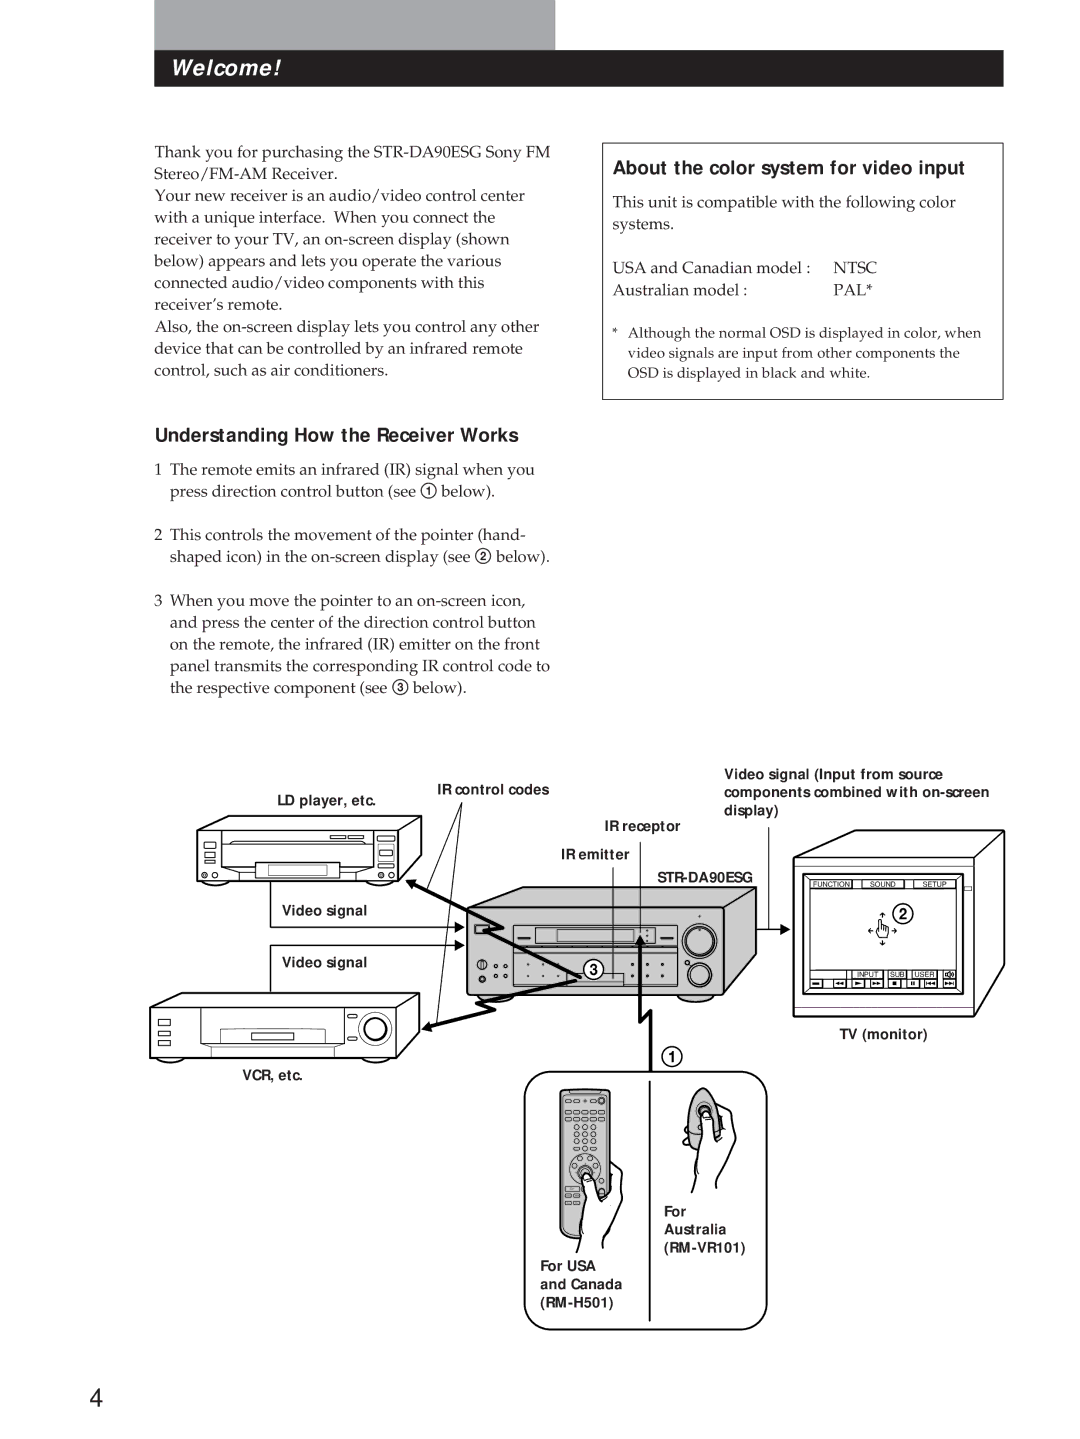 Sony STR-DA90ESG manual About the color system for video input, Understanding How the Receiver Works, Australian model 